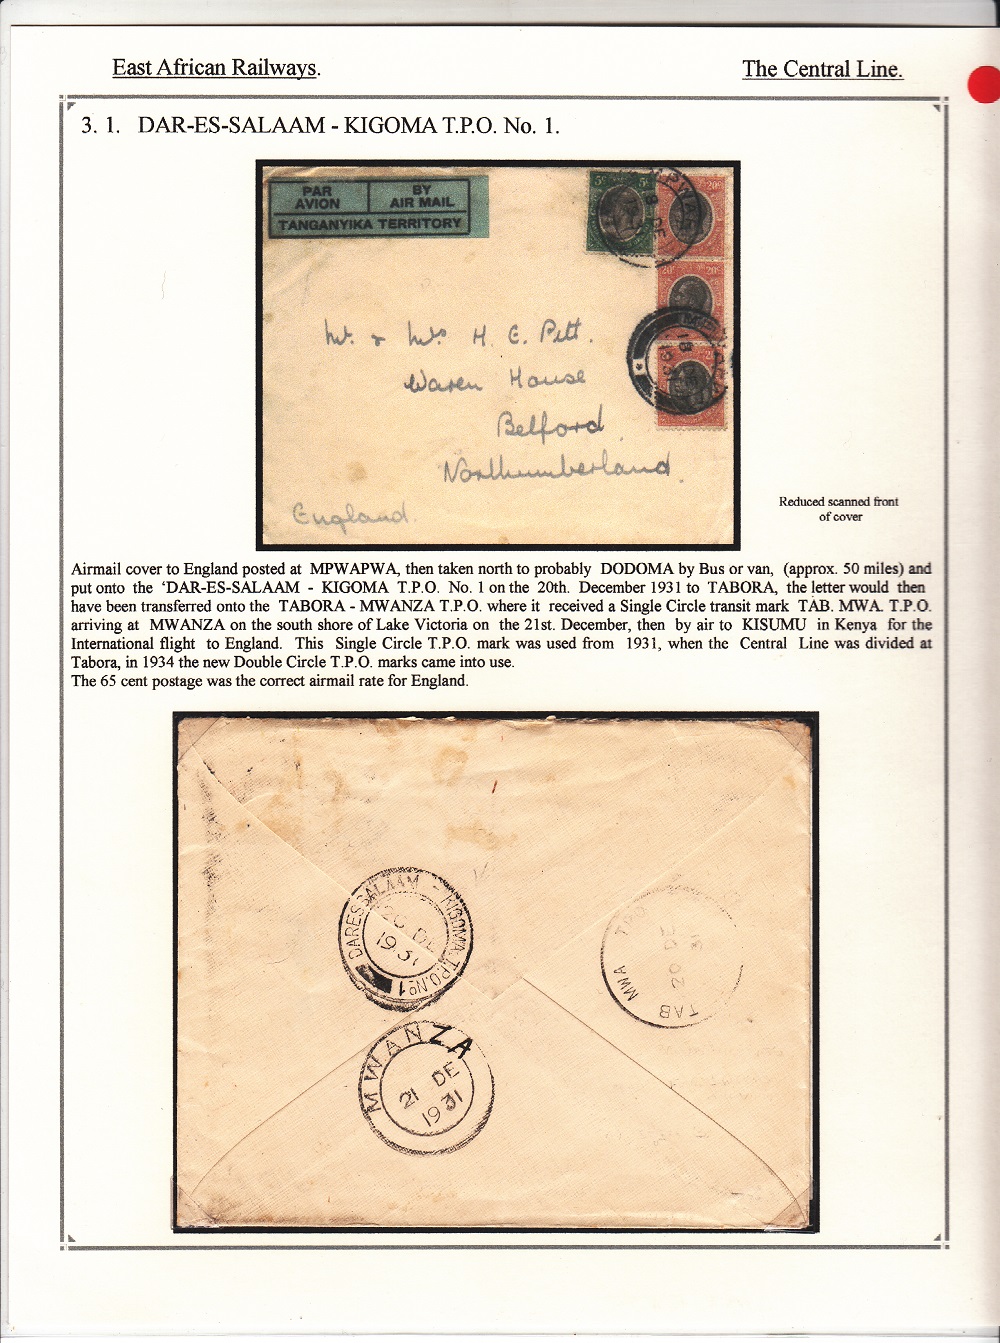 Page 15 of exhibit